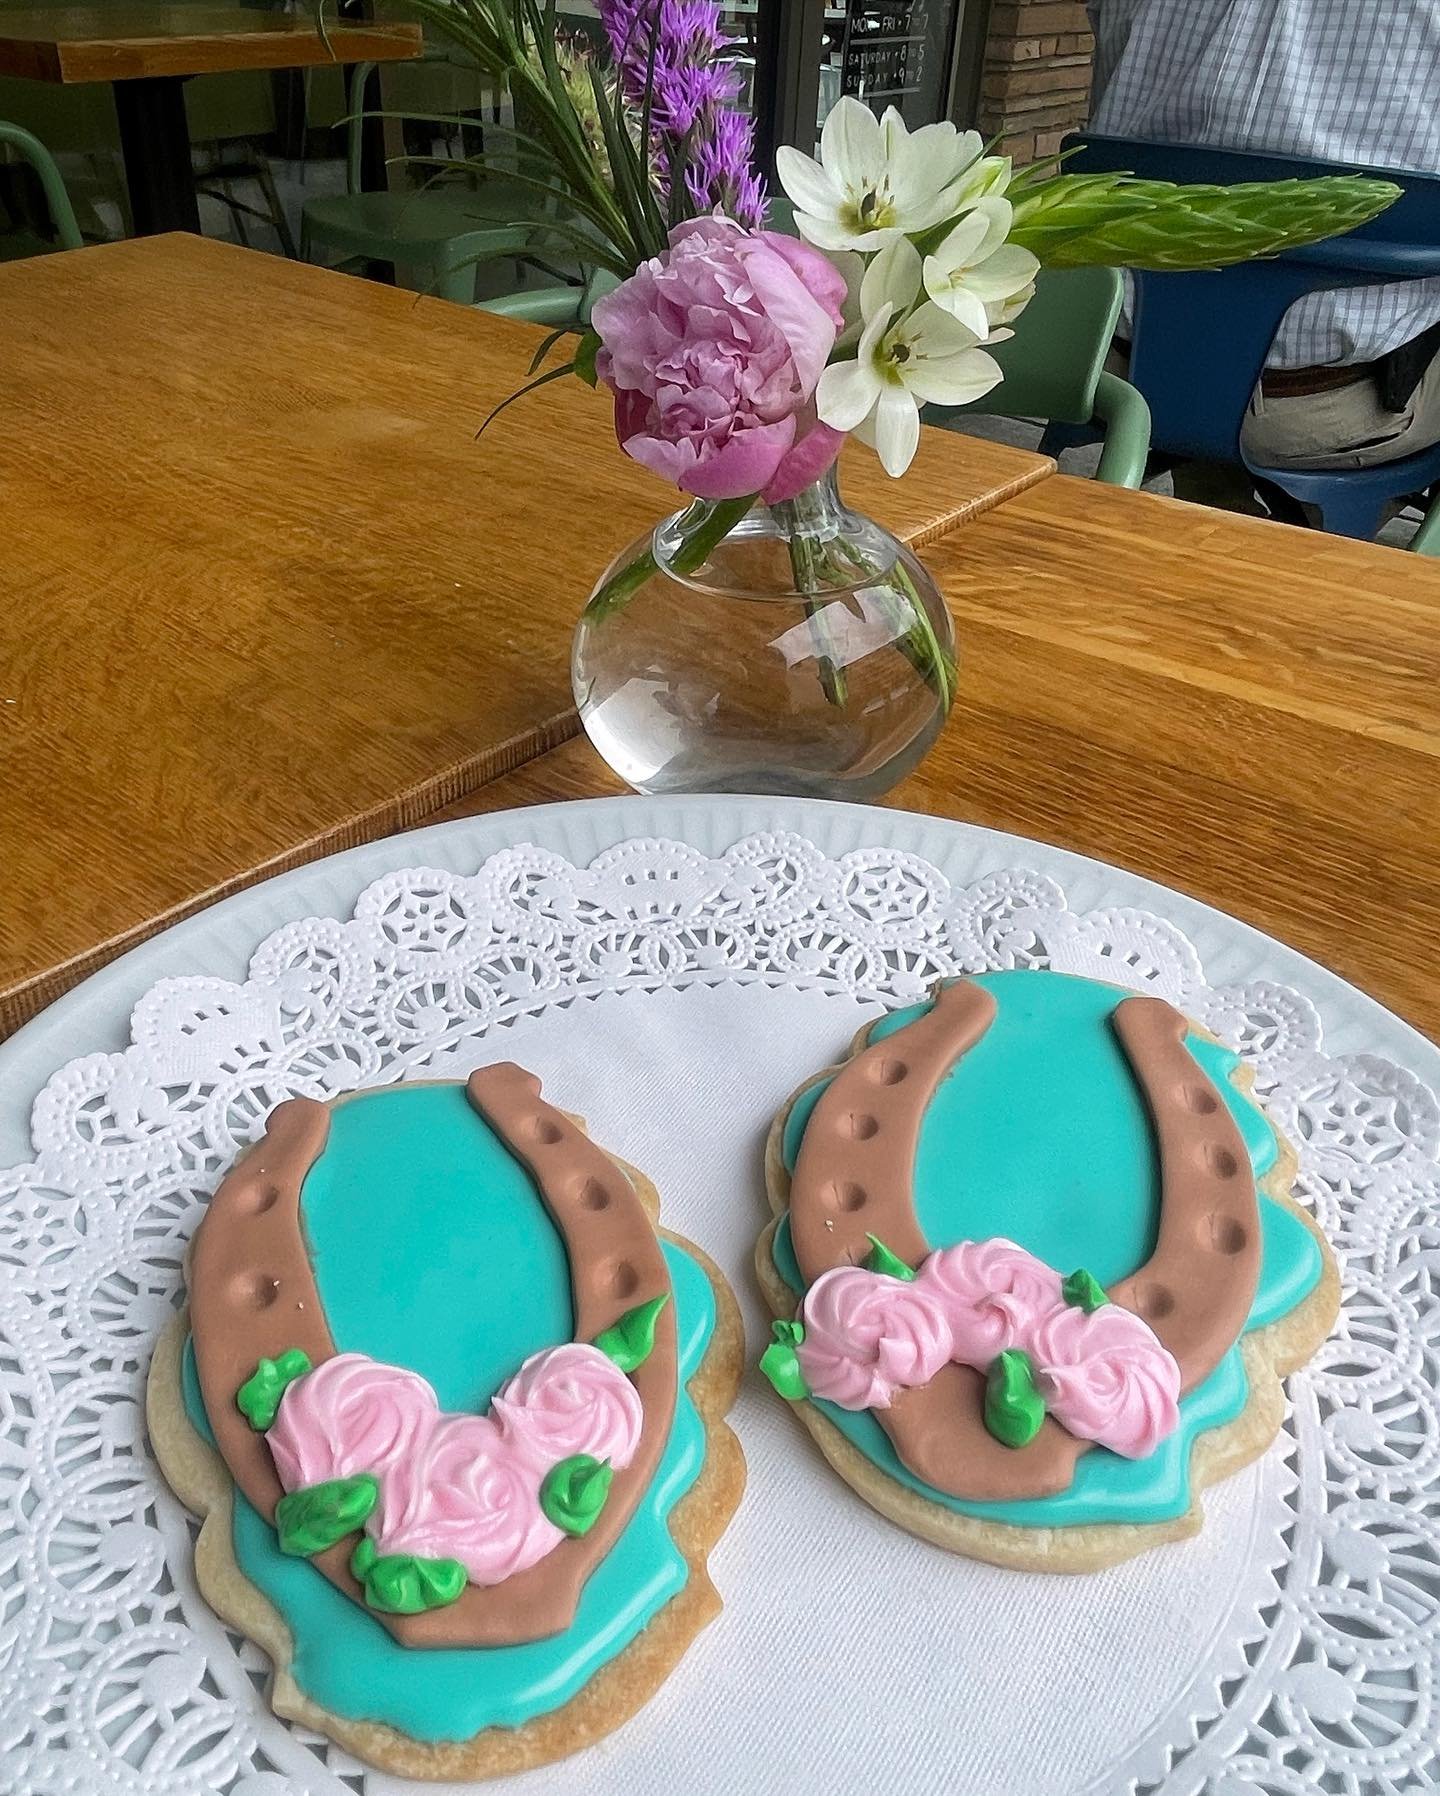 Next Saturday it&rsquo;s the Double Whammy!! Kentucky Derby &amp; May the 4th be with you. Cookies Available to order by the Dozen $42+ or stop by and grab 1 from the Dessert Case Sat 4th.